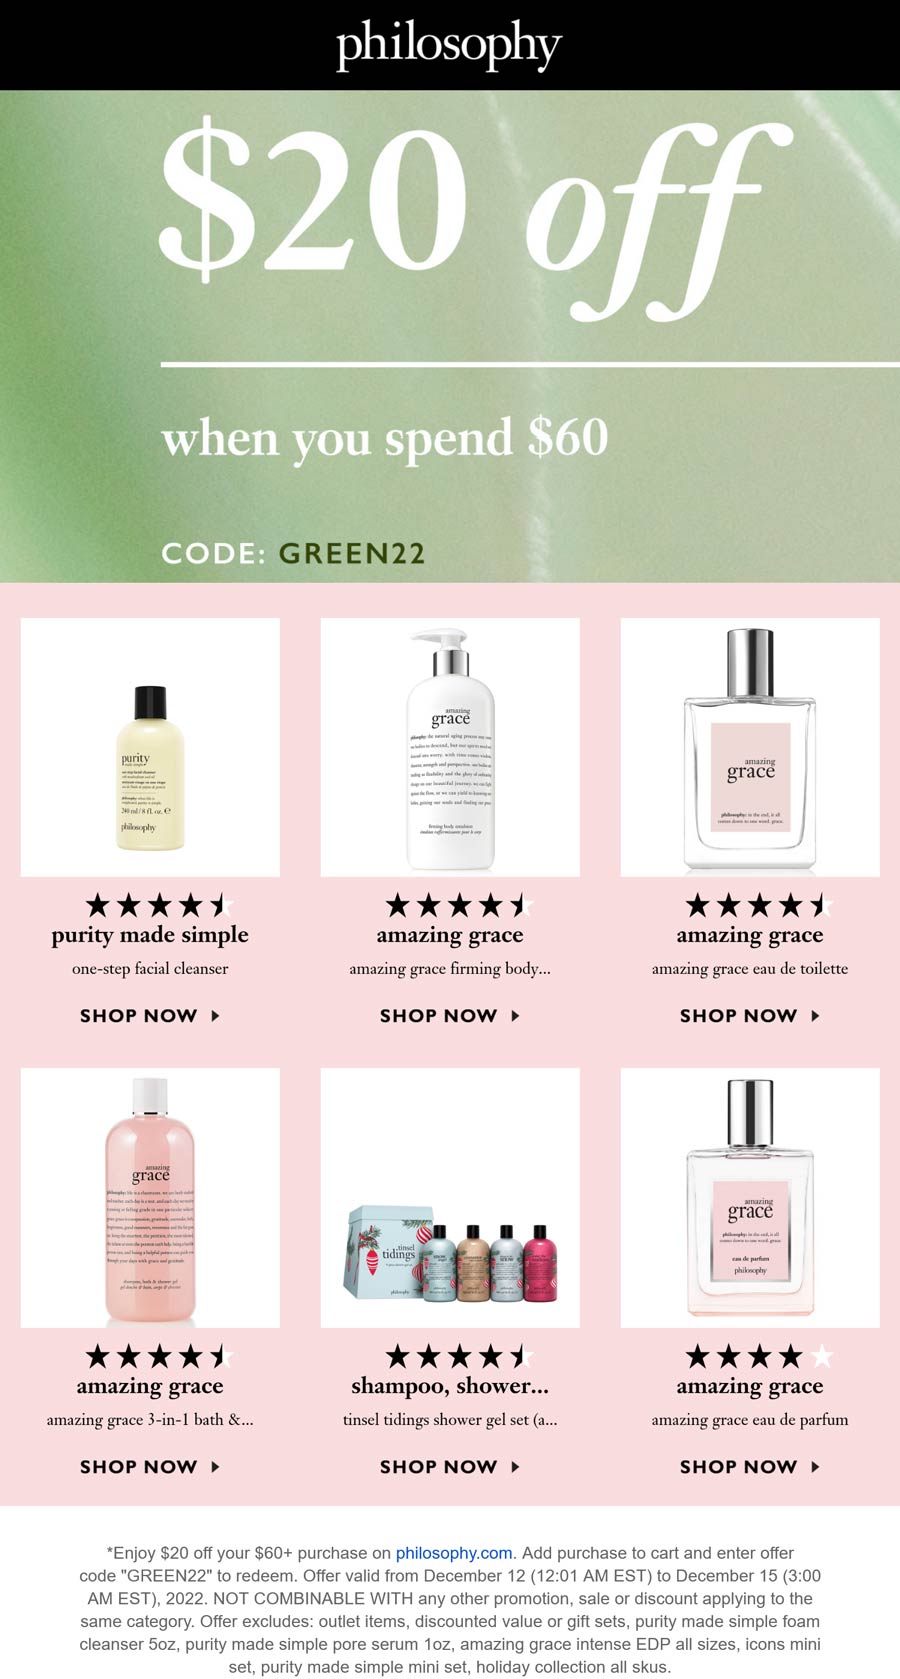 Philosophy stores Coupon  $20 off $60 at Philosophy via promo code GREEN22 #philosophy 